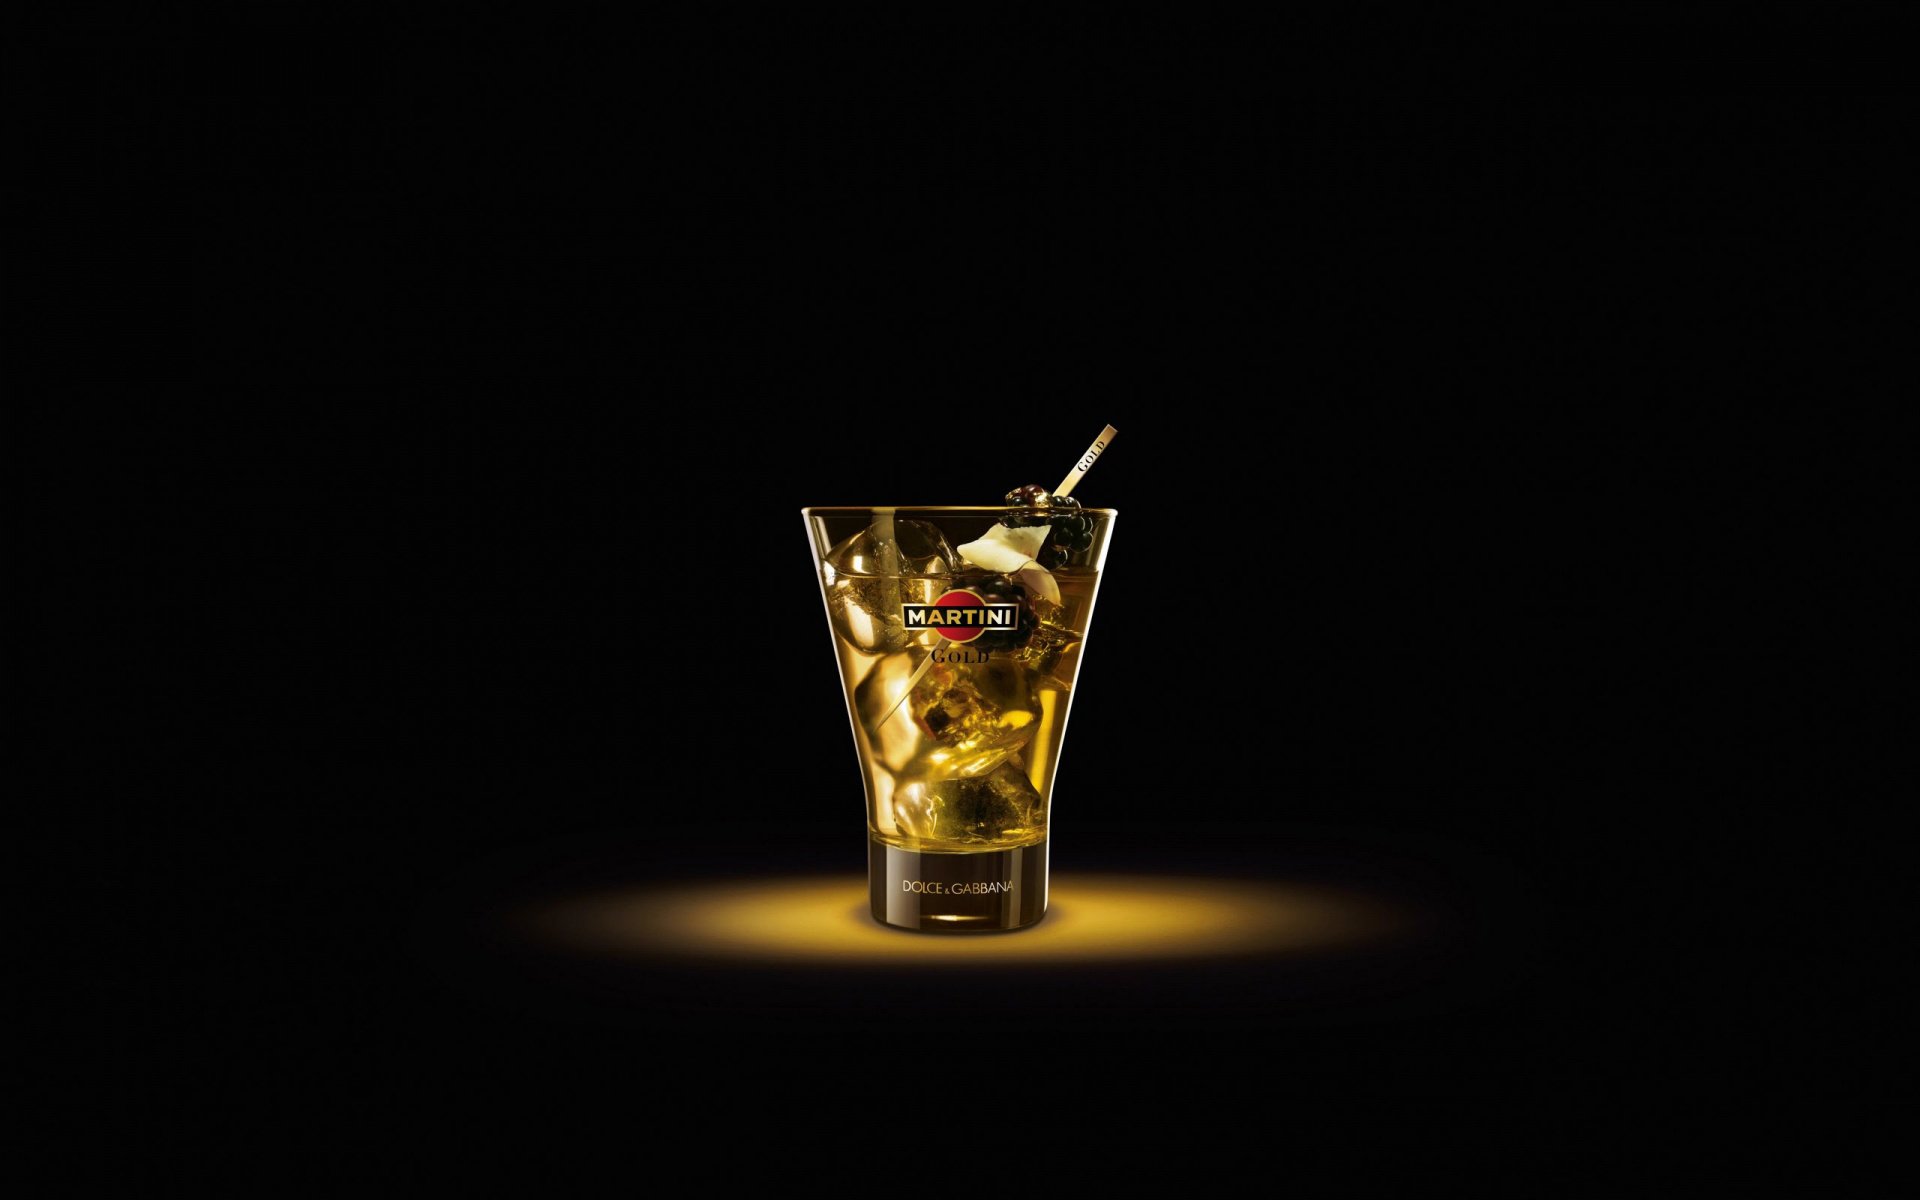 A martini glass on a black background. Simplicity of style